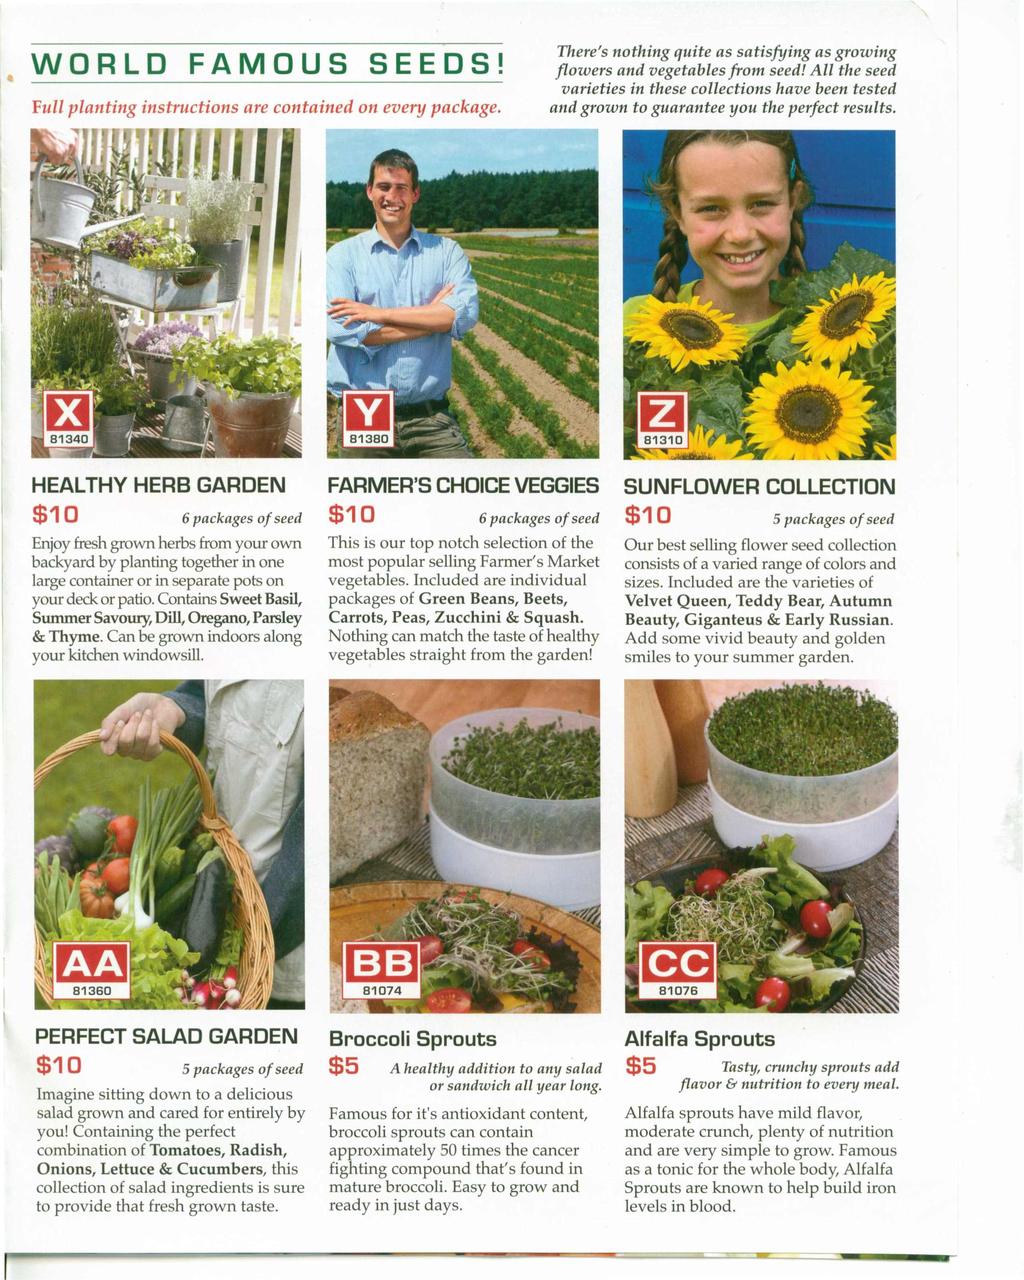 WORLD FAMOUS SEEDS! Full planting instructions are contained on every package. There's nothing quite as satisfying as growing flowers and vegetables from seed!